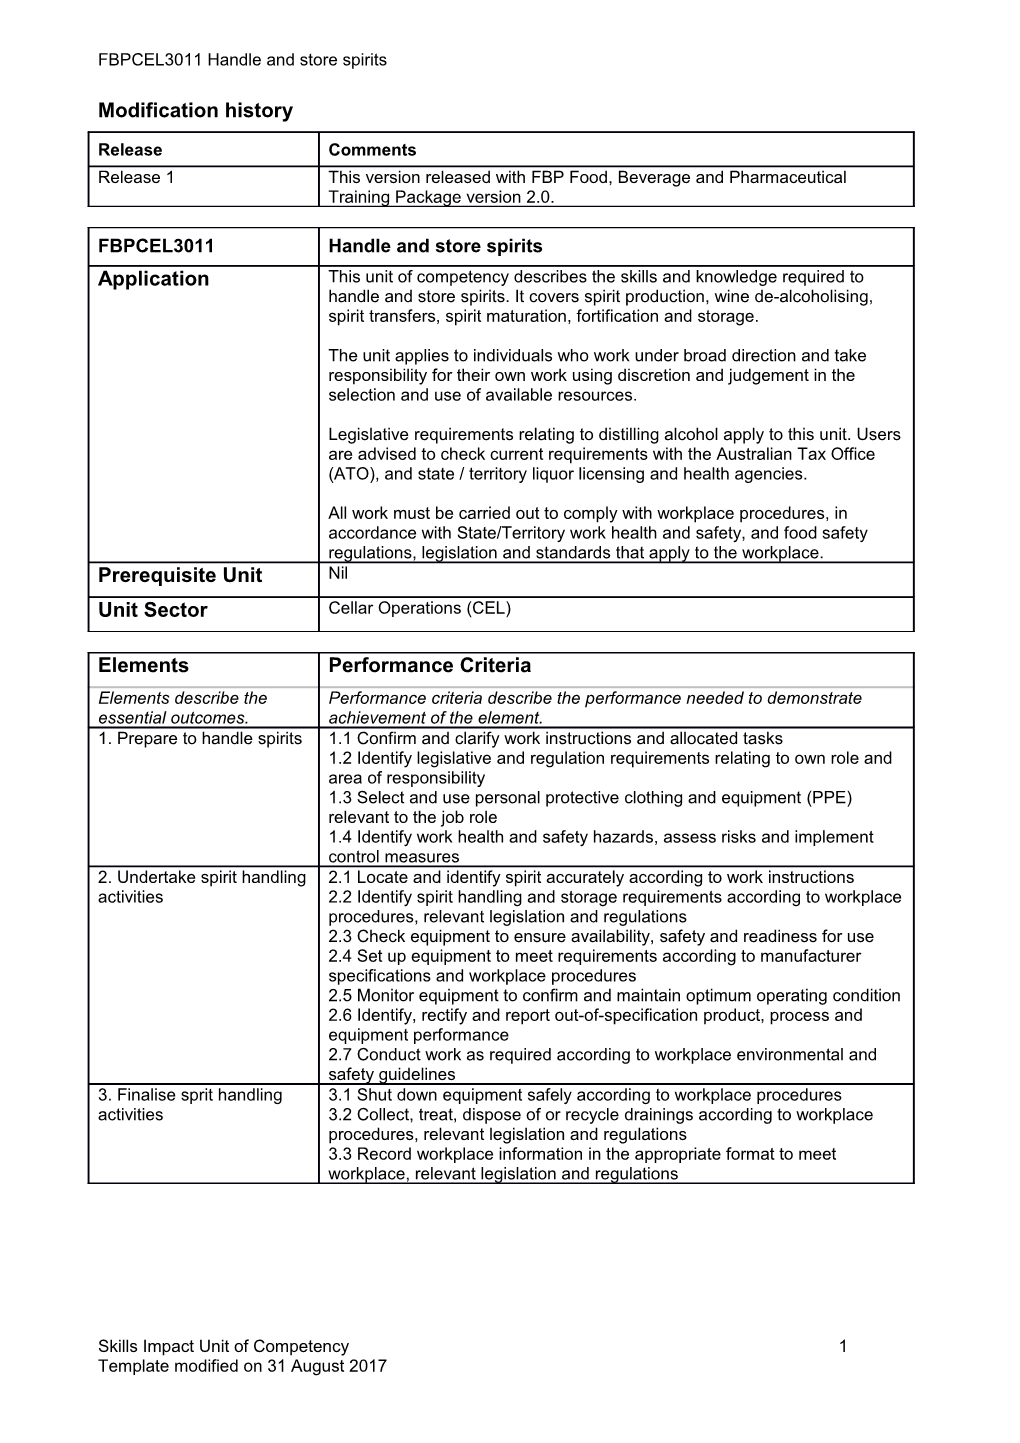 Skills Impact Unit of Competency Template s17